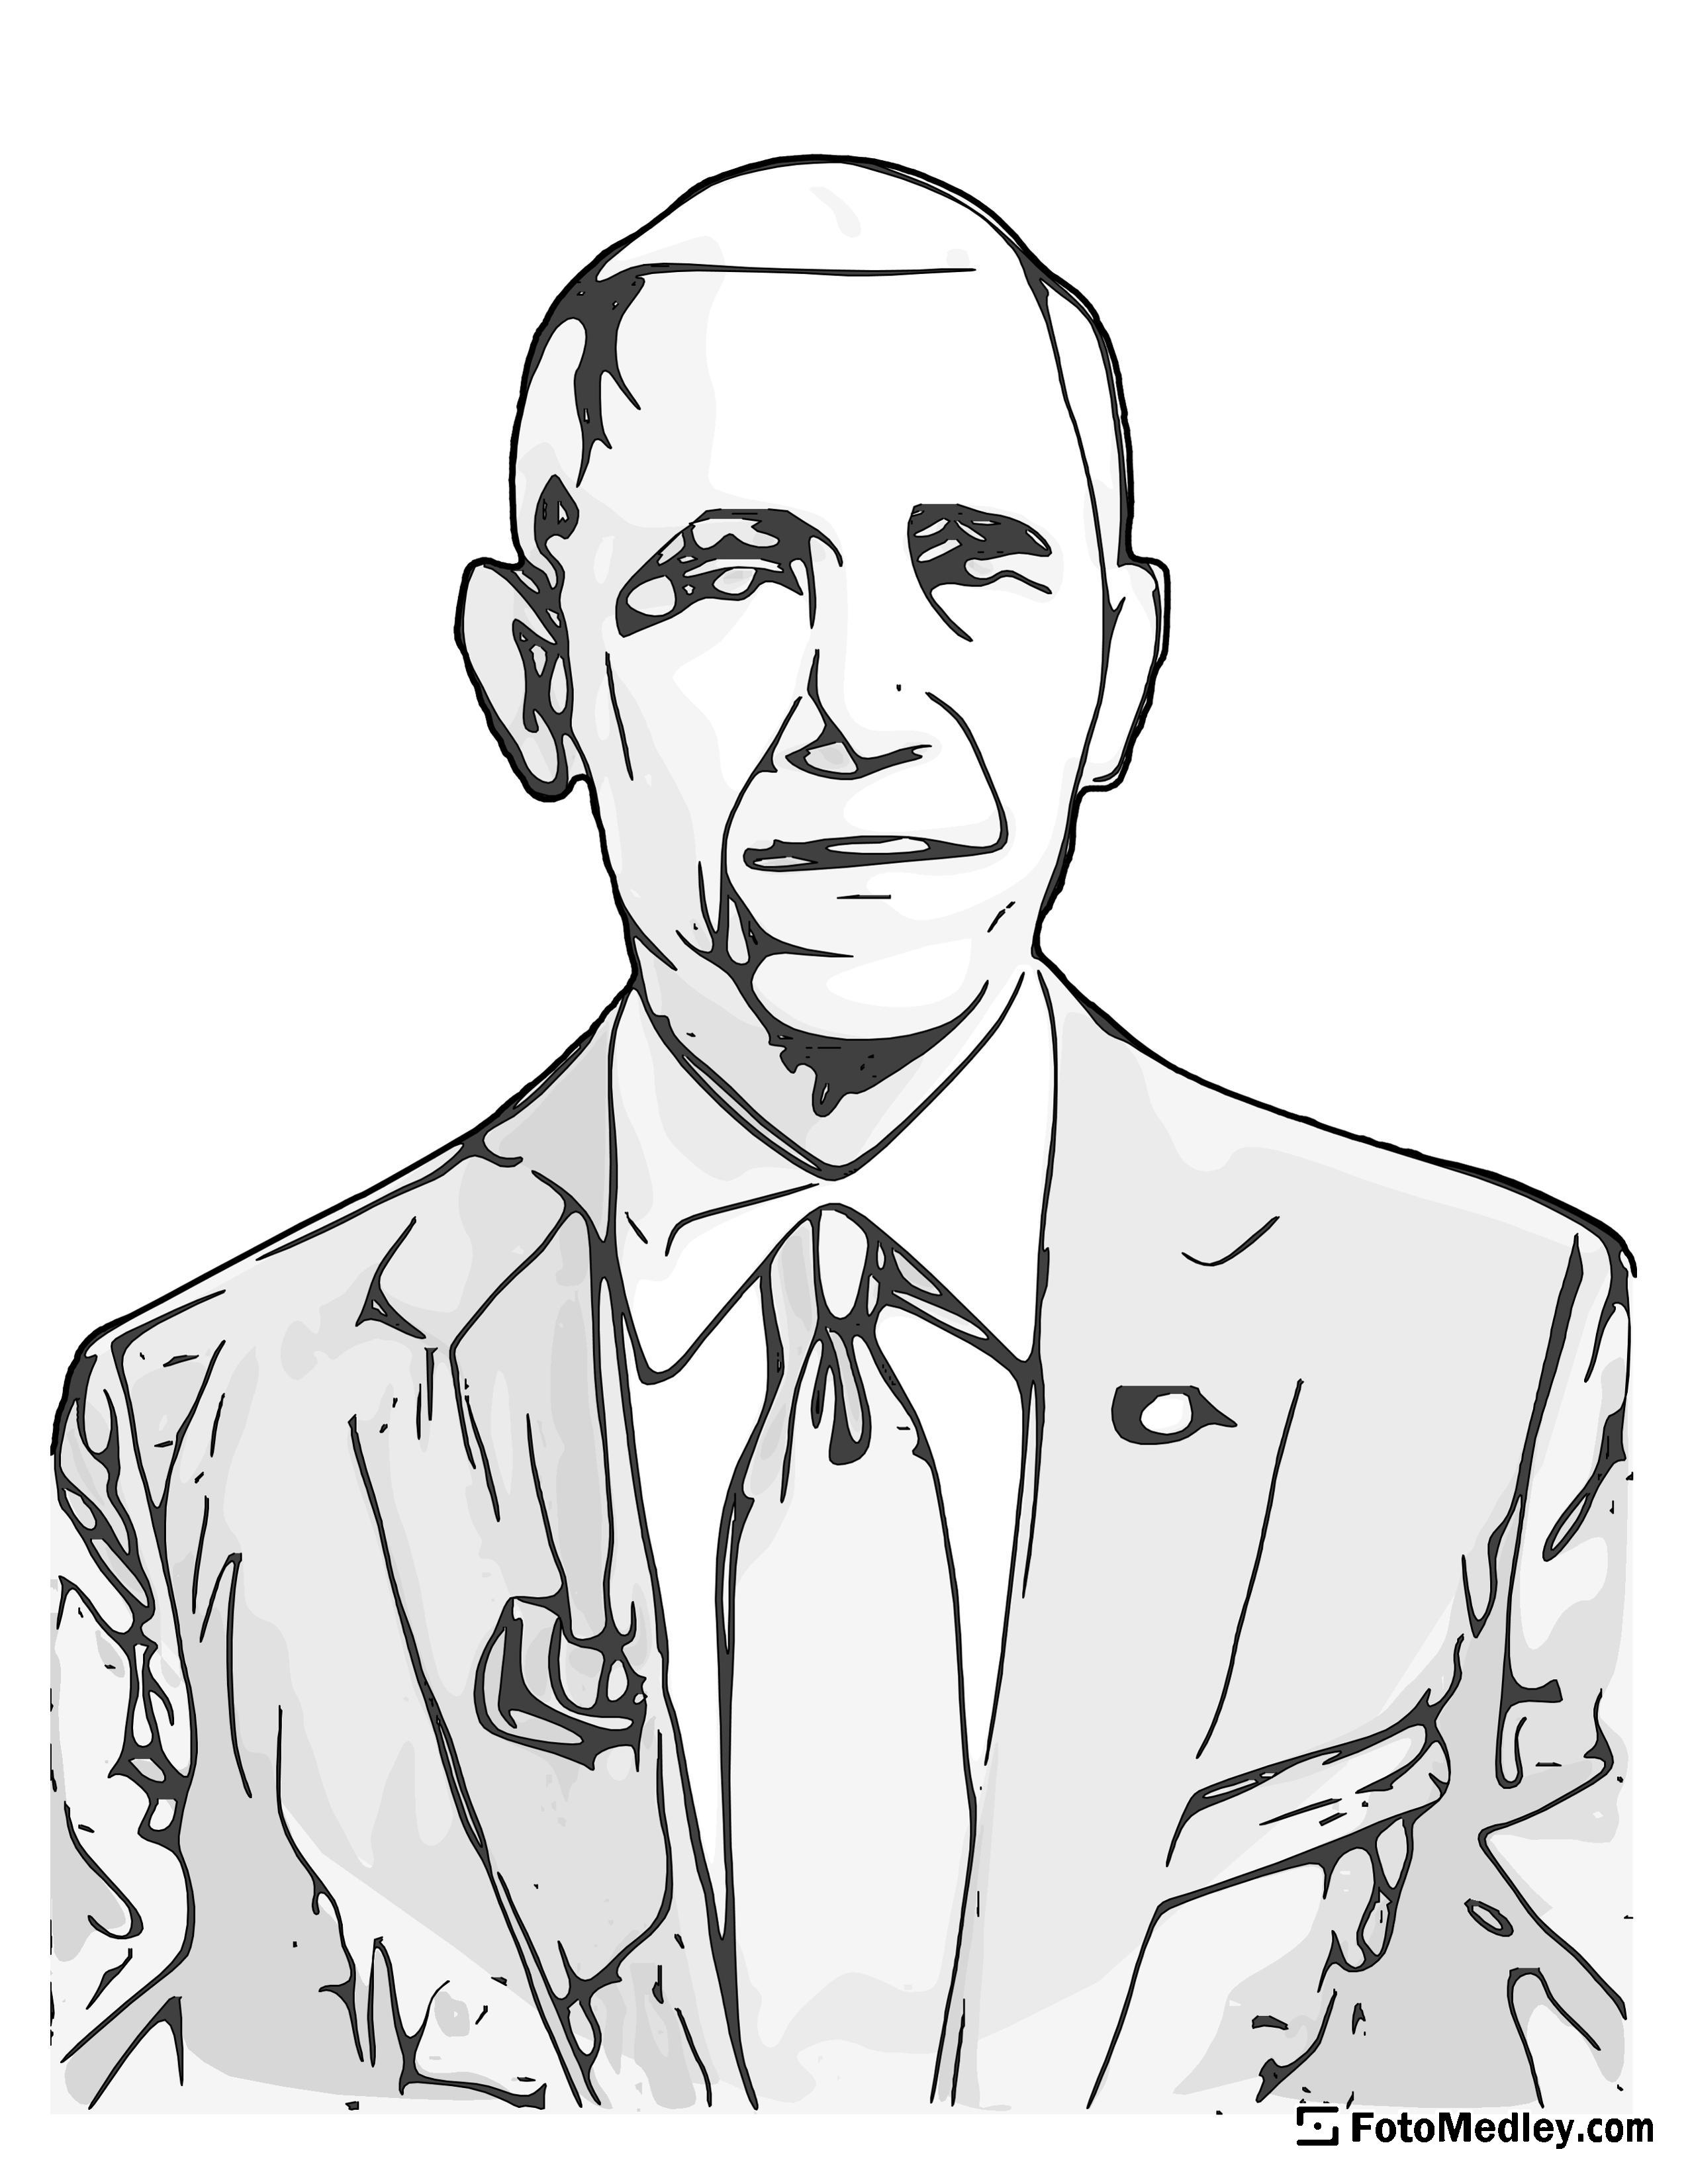 A cartoon style coloring sketch of Barack Obama, 44th President of the United States.